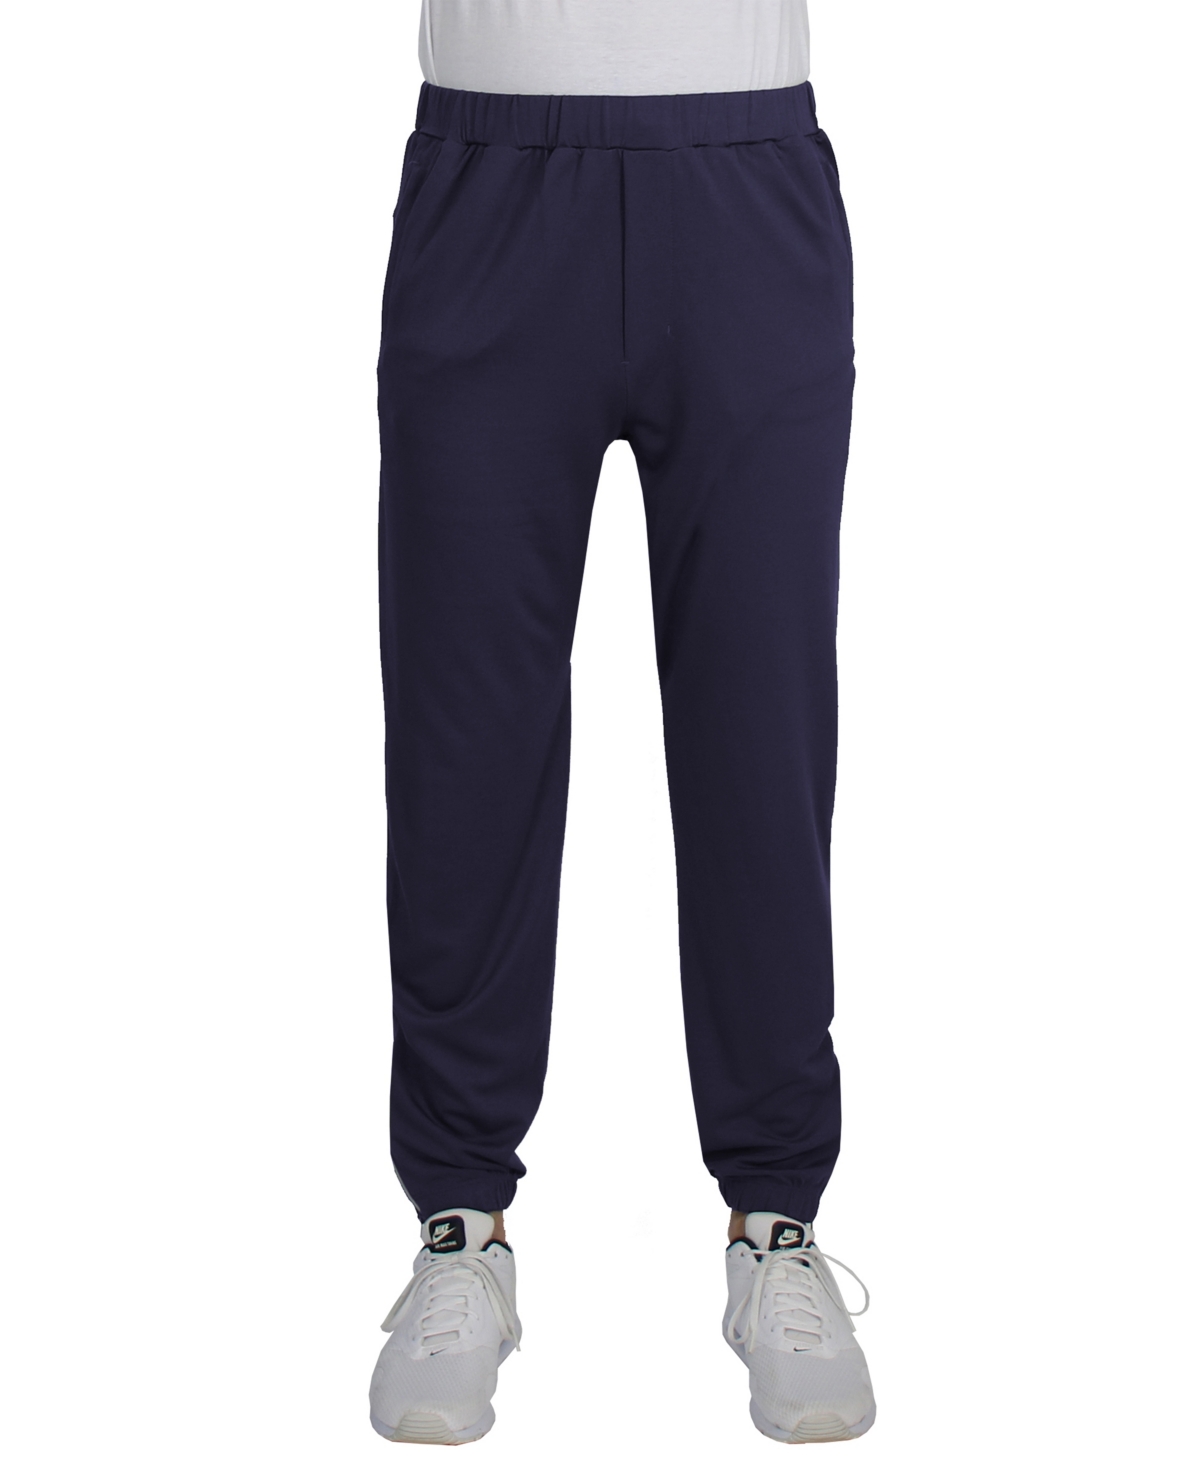 Blue Ice Men's Moisture Wicking Performance Joggers With Reflective Trim Ankle Zippers In Navy